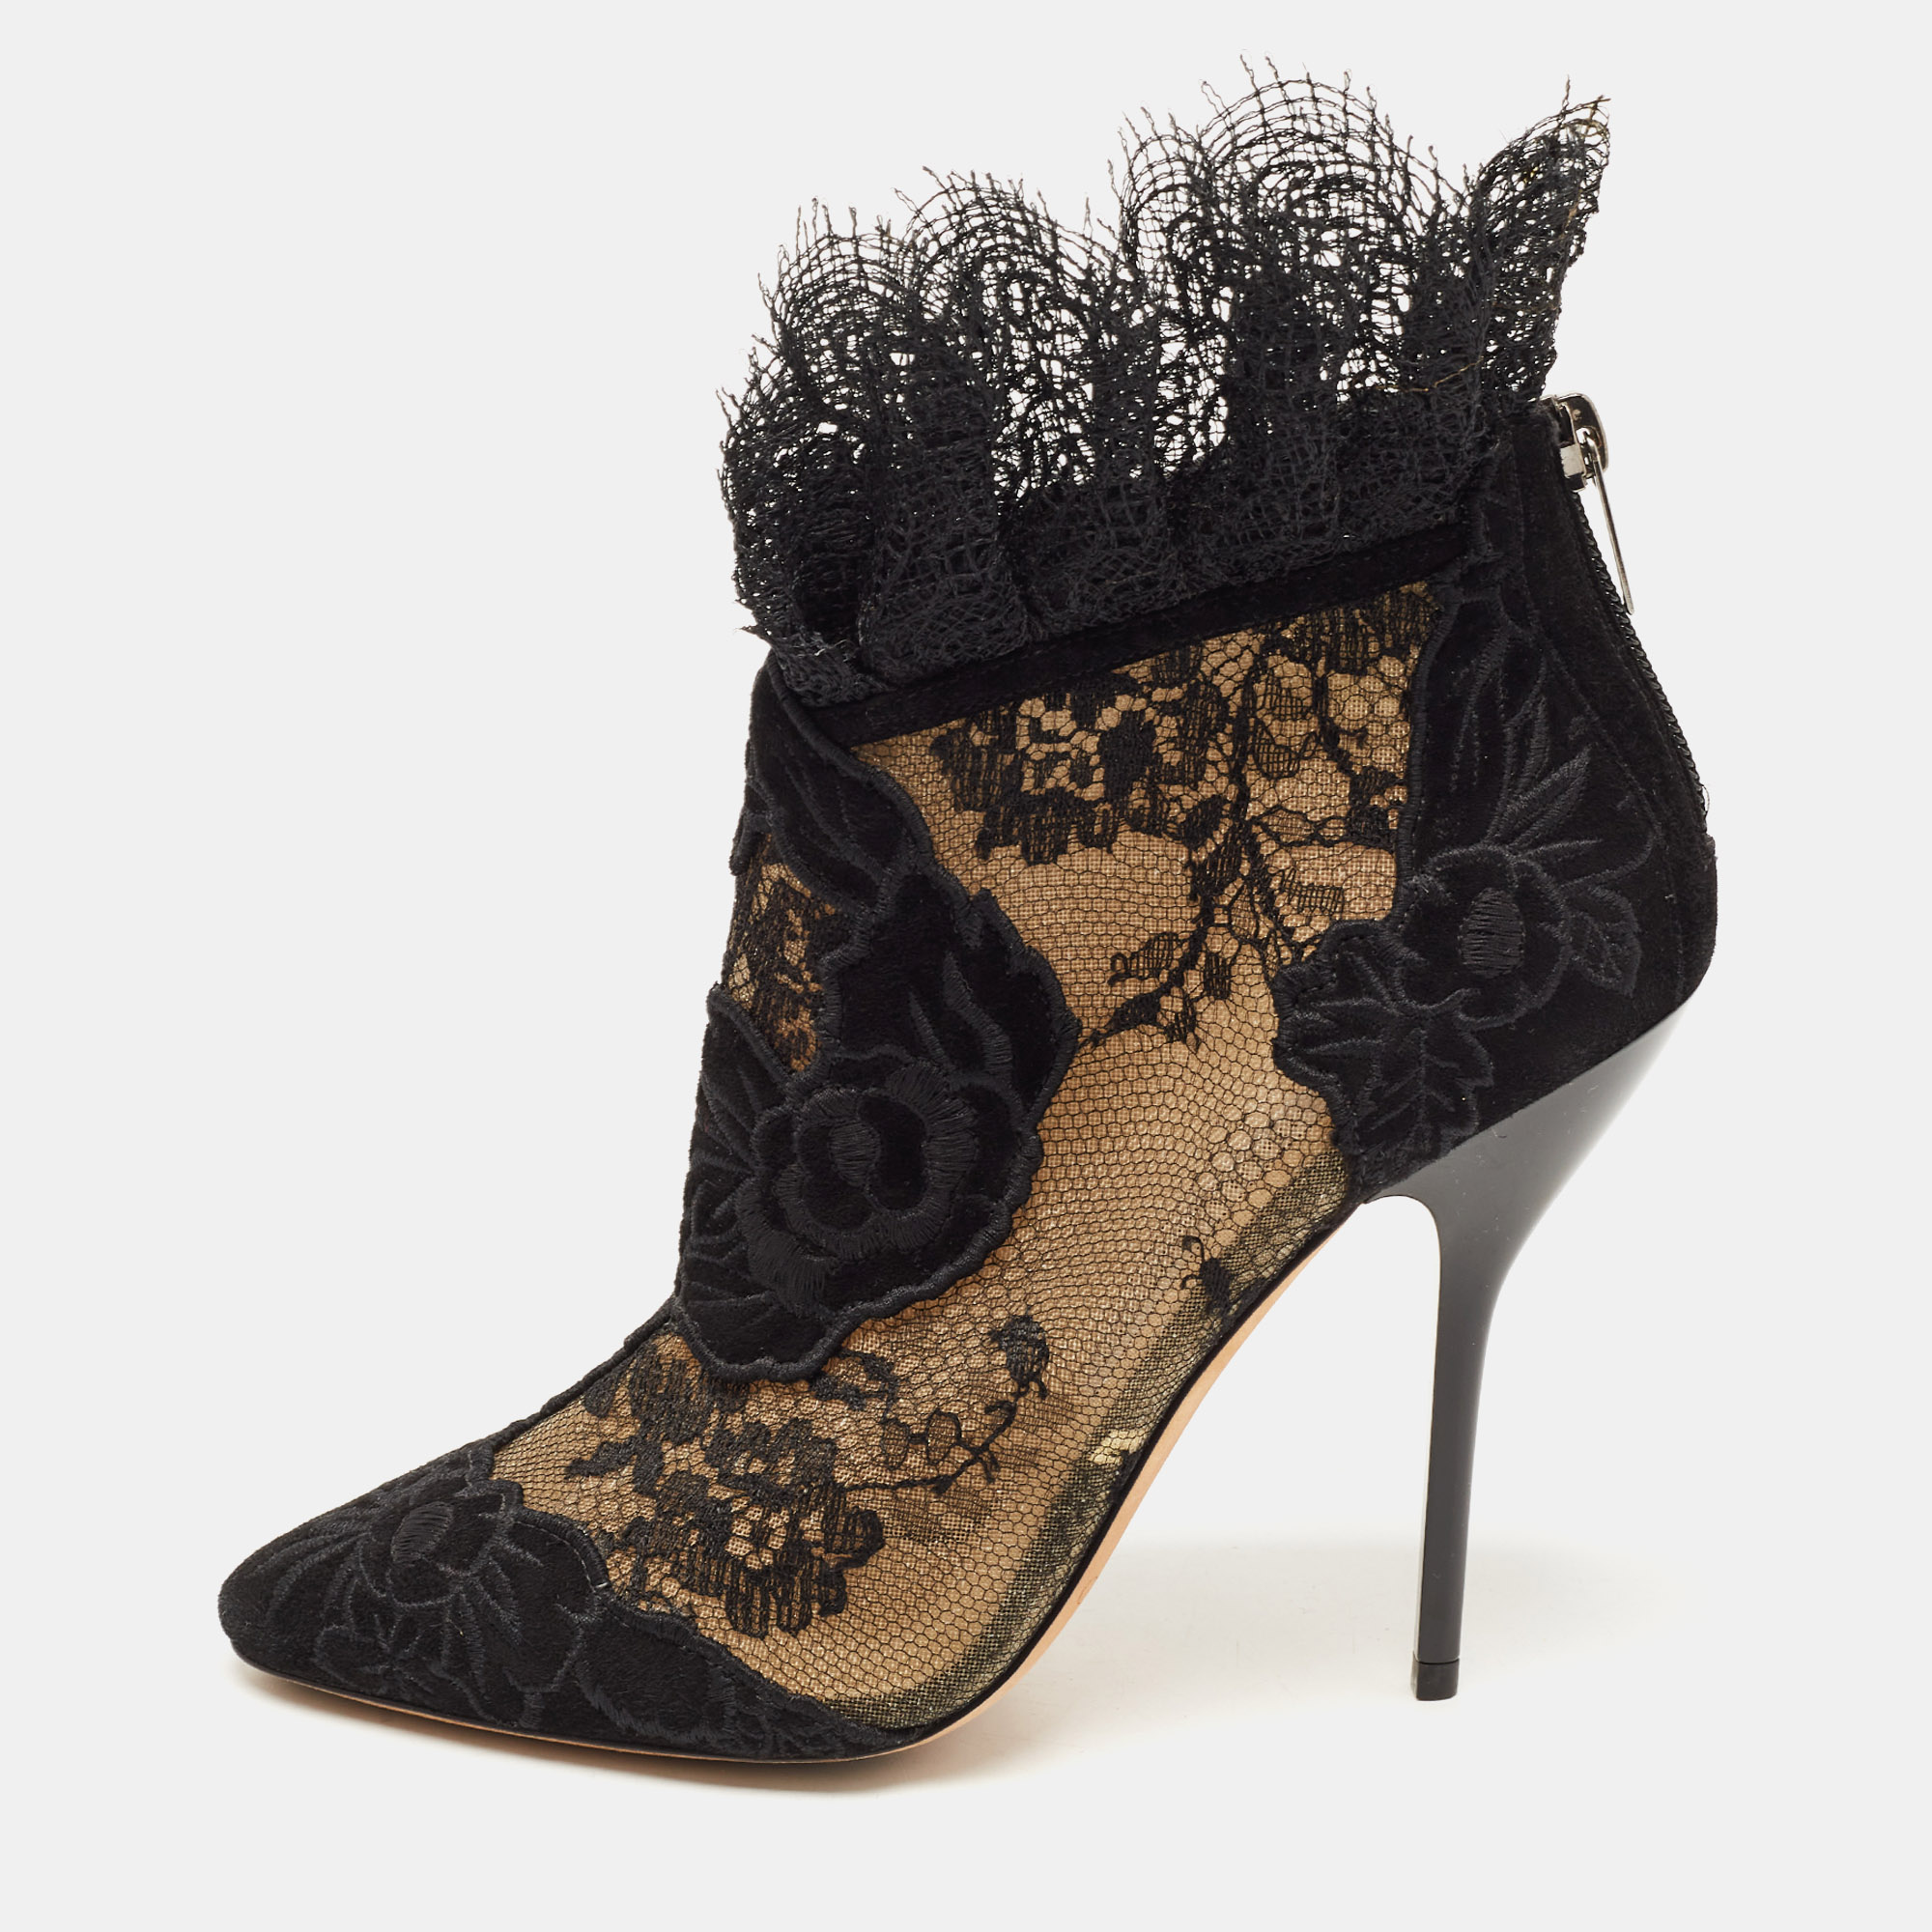 Jimmy Choo Black Lace And Floral Embroidered Suede Kamaris Ankle Booties Size 37